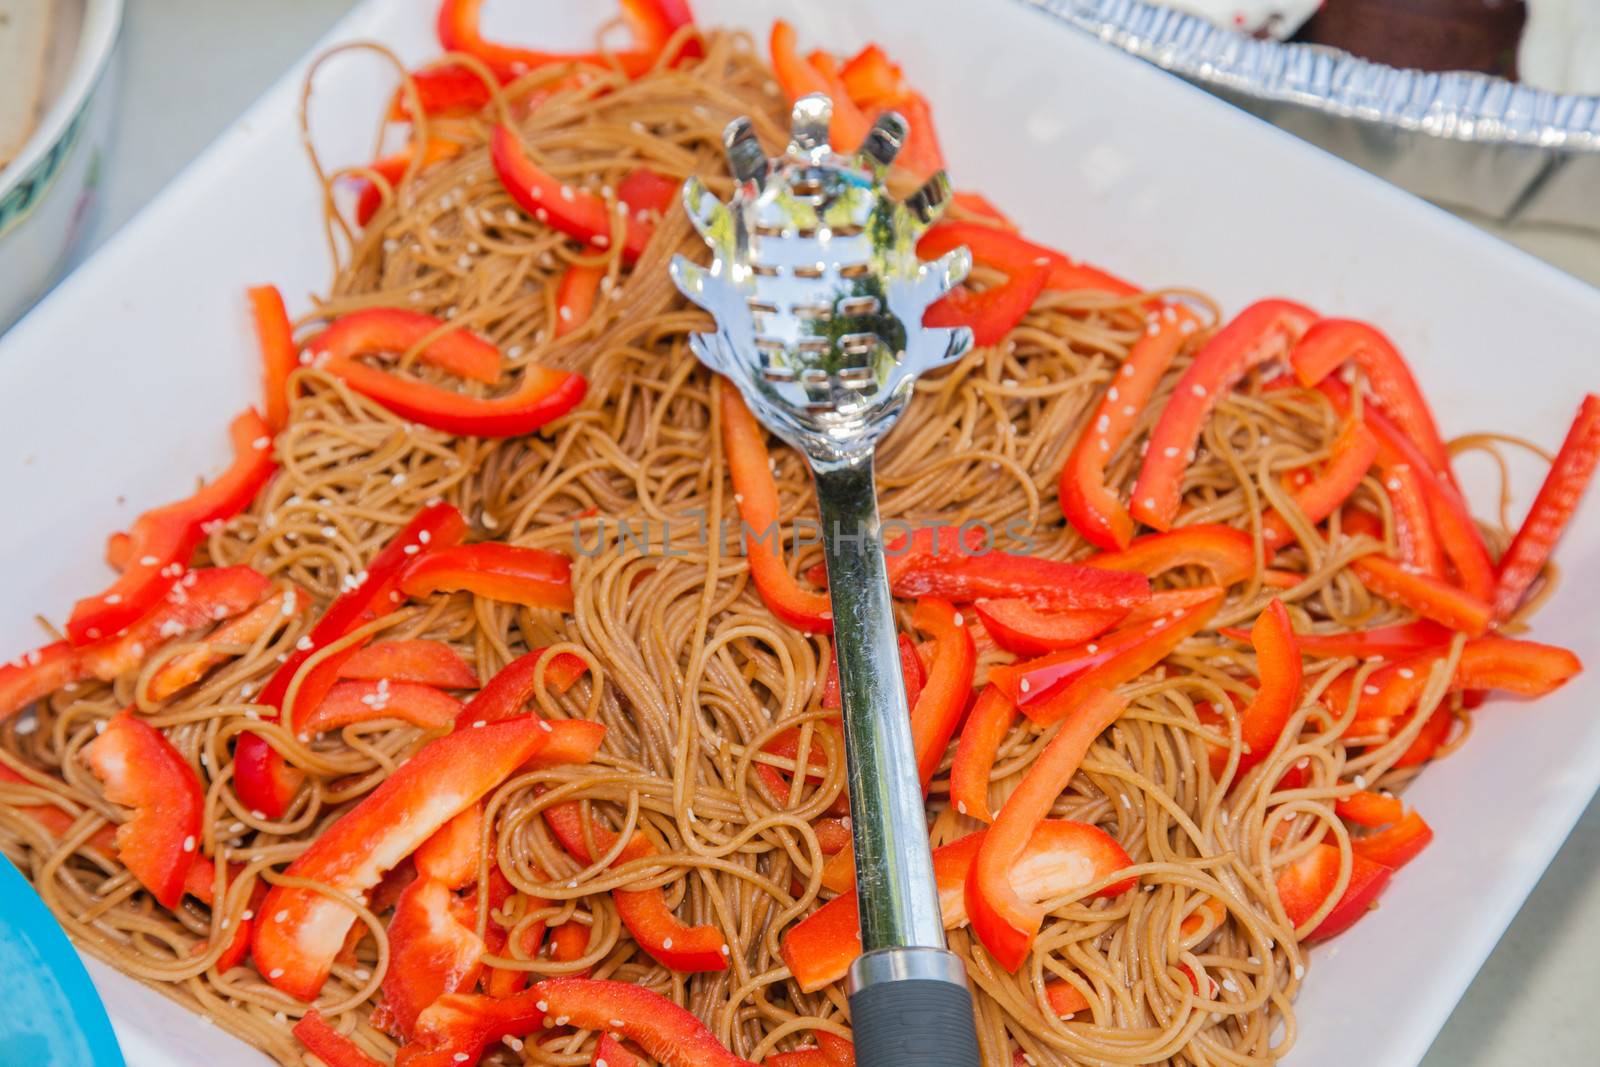 Whole-Wheat Spaghetti with Peppers by melastmohican